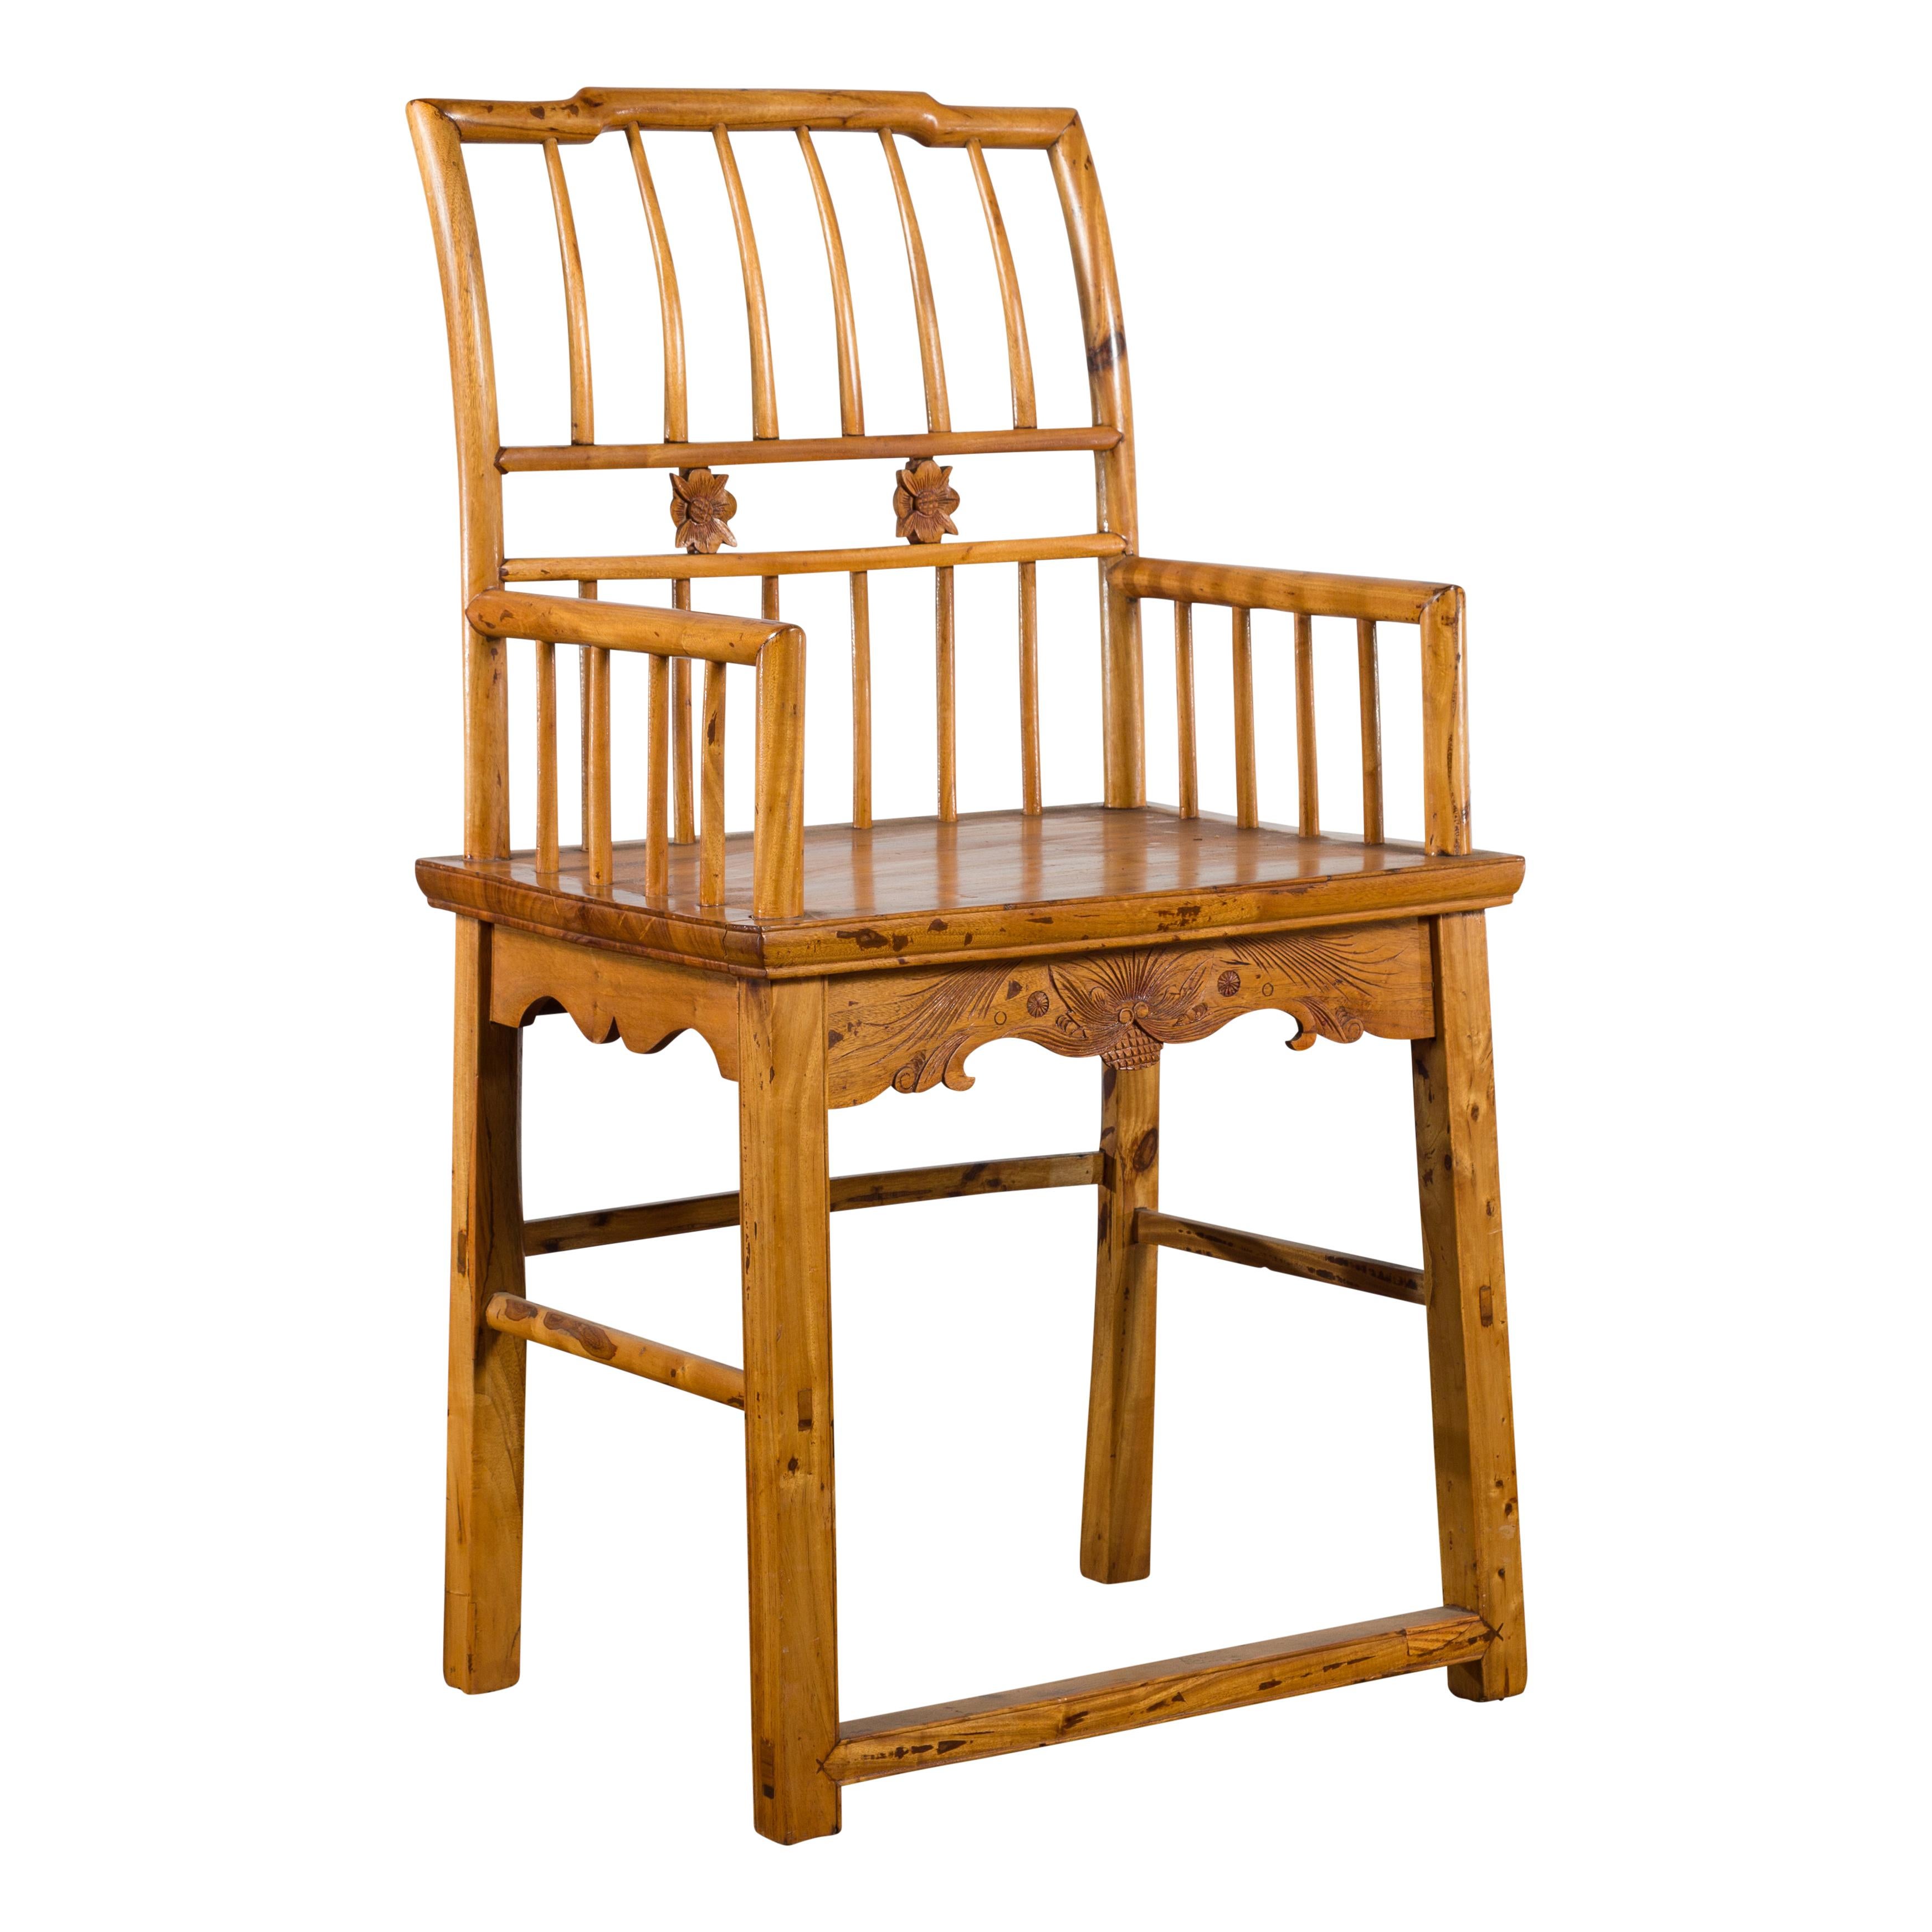 Chinese Qing Dynasty Period 19th Century Elmwood Armchair with Hand-Carved Apron For Sale 12